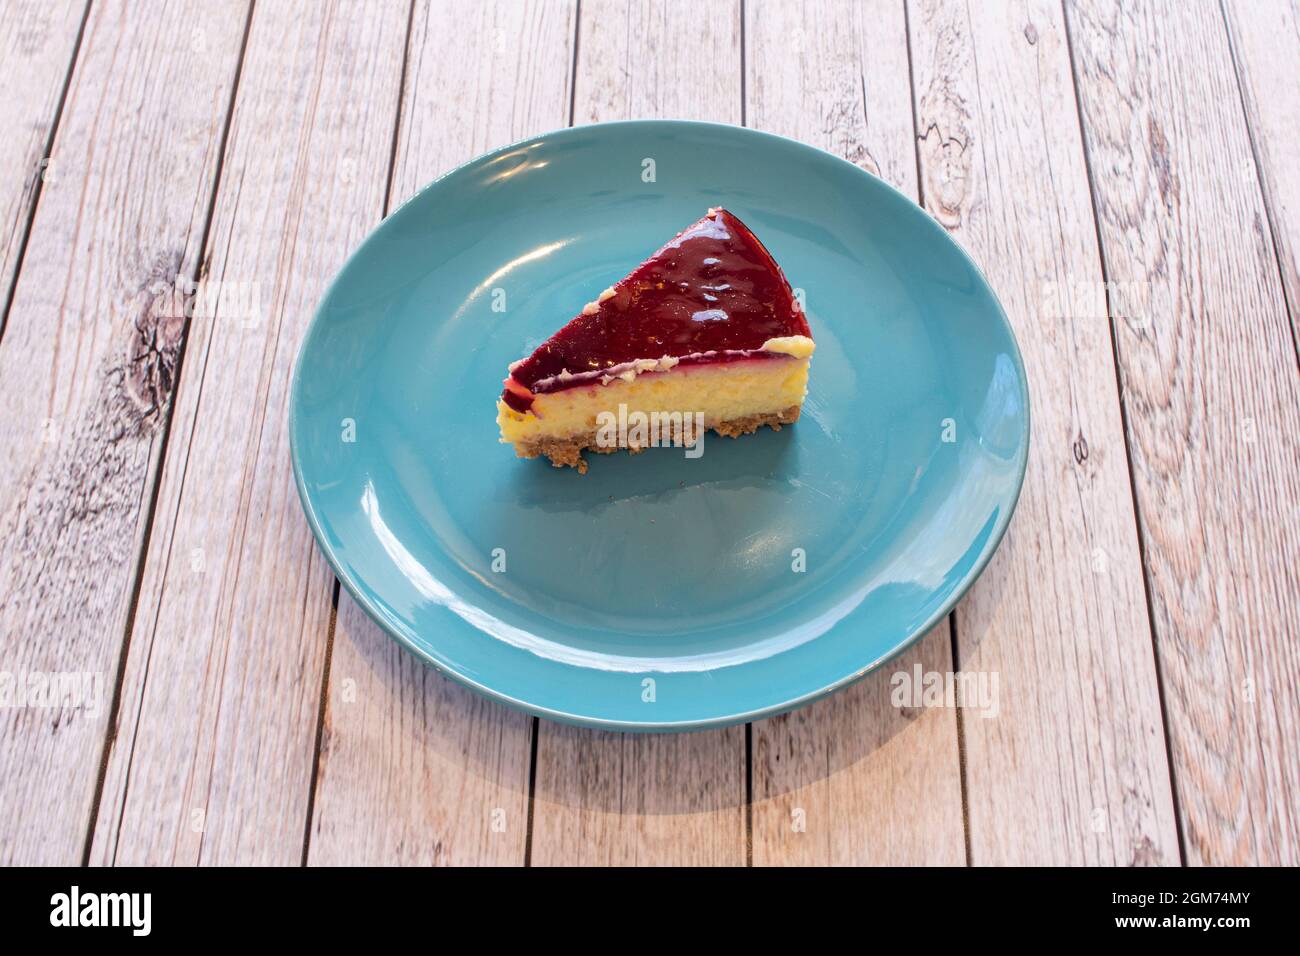 Small portion of industrially made cheesecake on plain blue plate Stock Photo